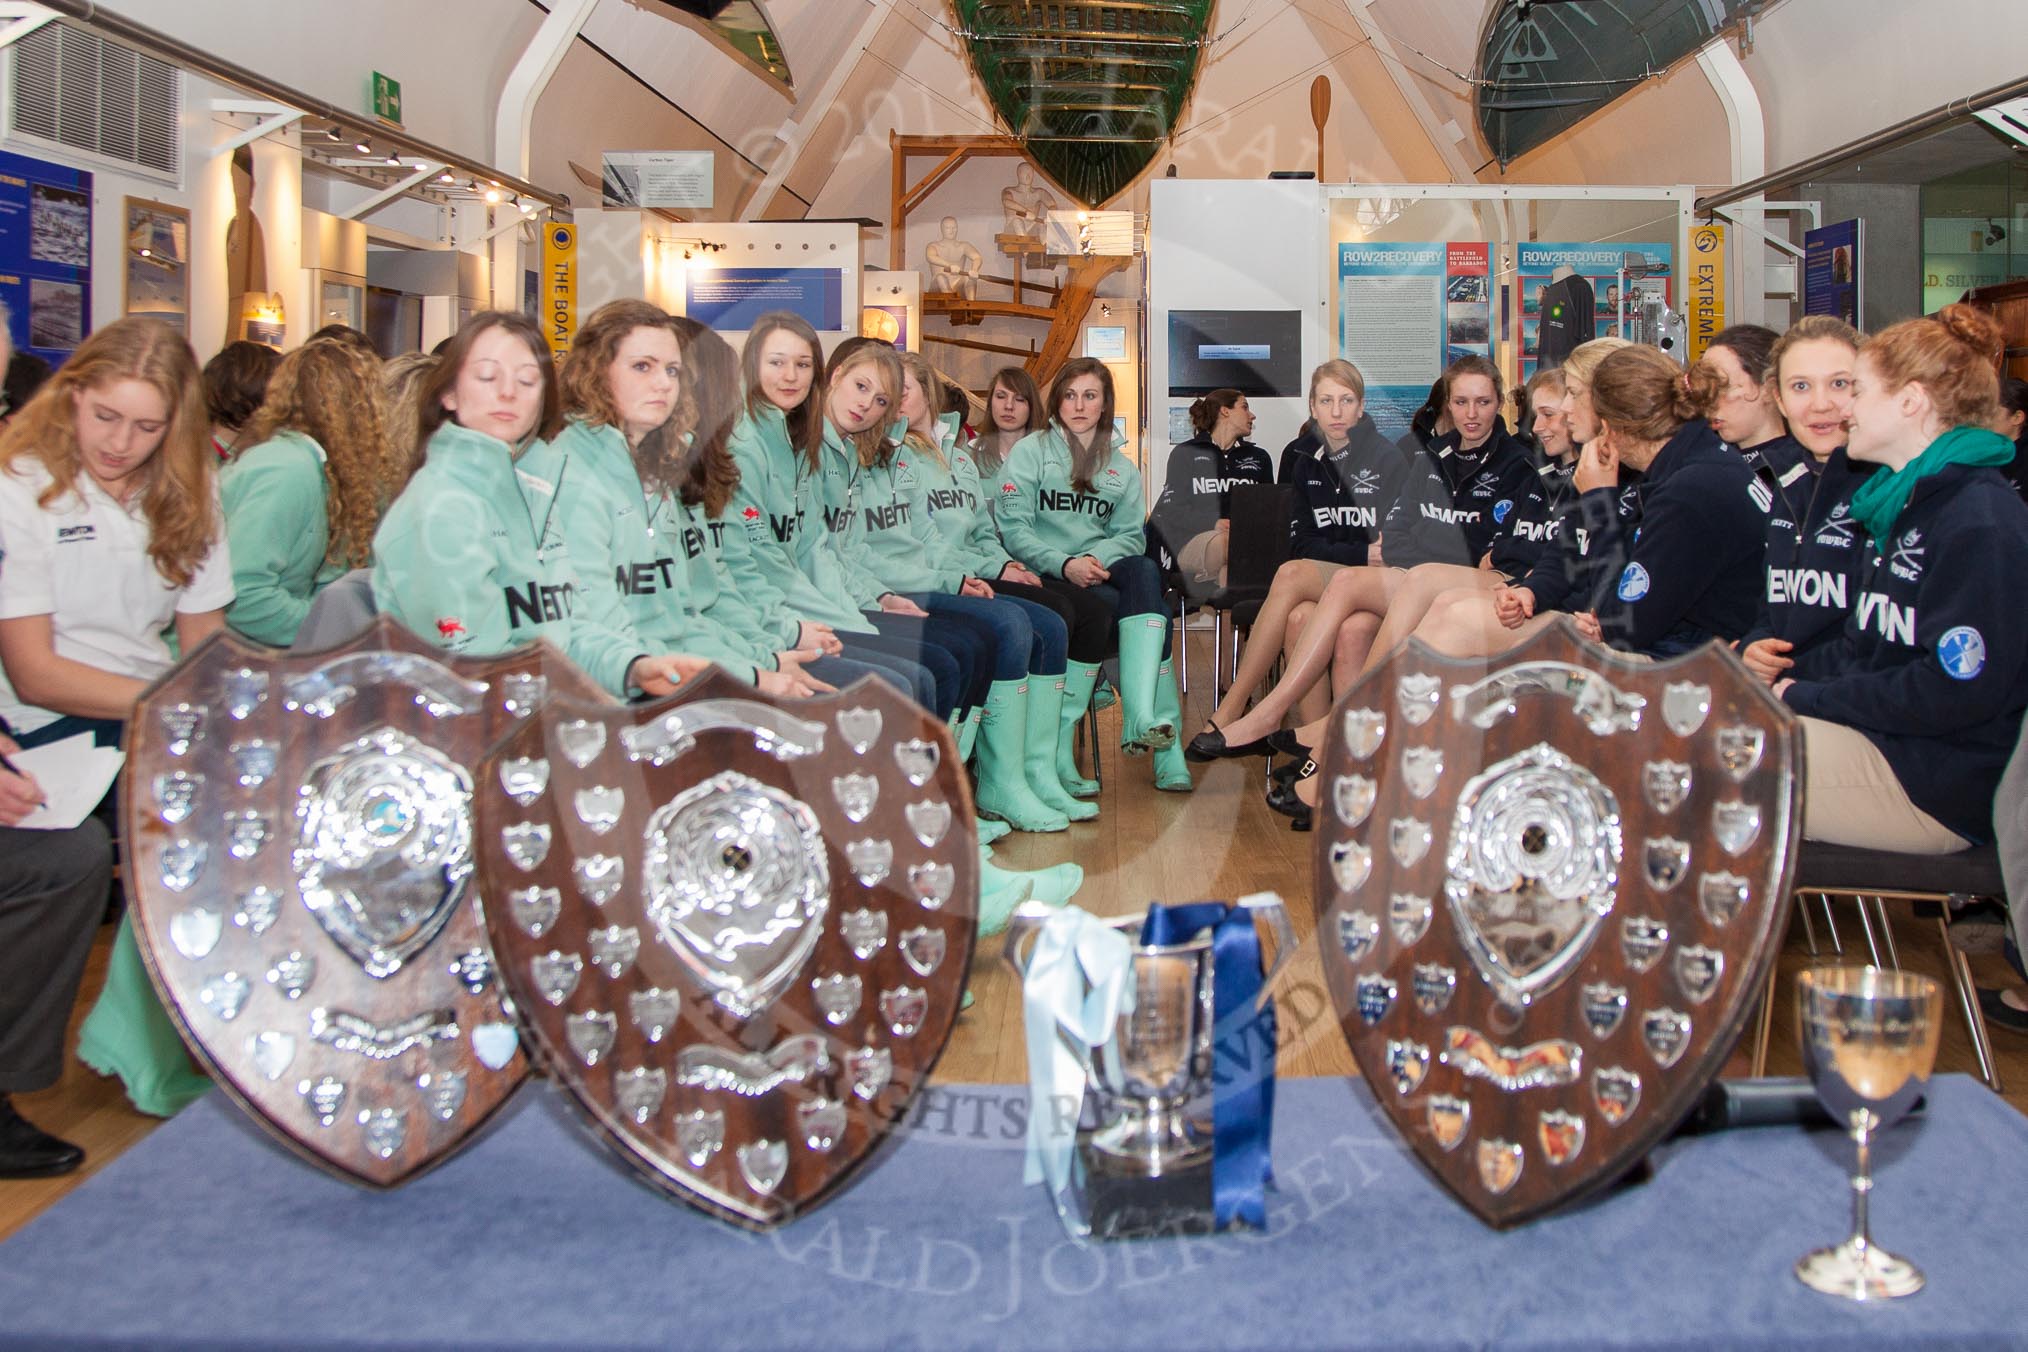 The Boat Race Season 2013 - Henley Boat Races Challenge: Sitting behind the Henley Boat Races trophies, the Cambridge University crews on the left and Oxford University on the right, at the Schwarzenbach International Gallery, Henley River and Rowing Museum..
River and Rowing Museum,
H,


on 19 March 2013 at 10:43, image #4